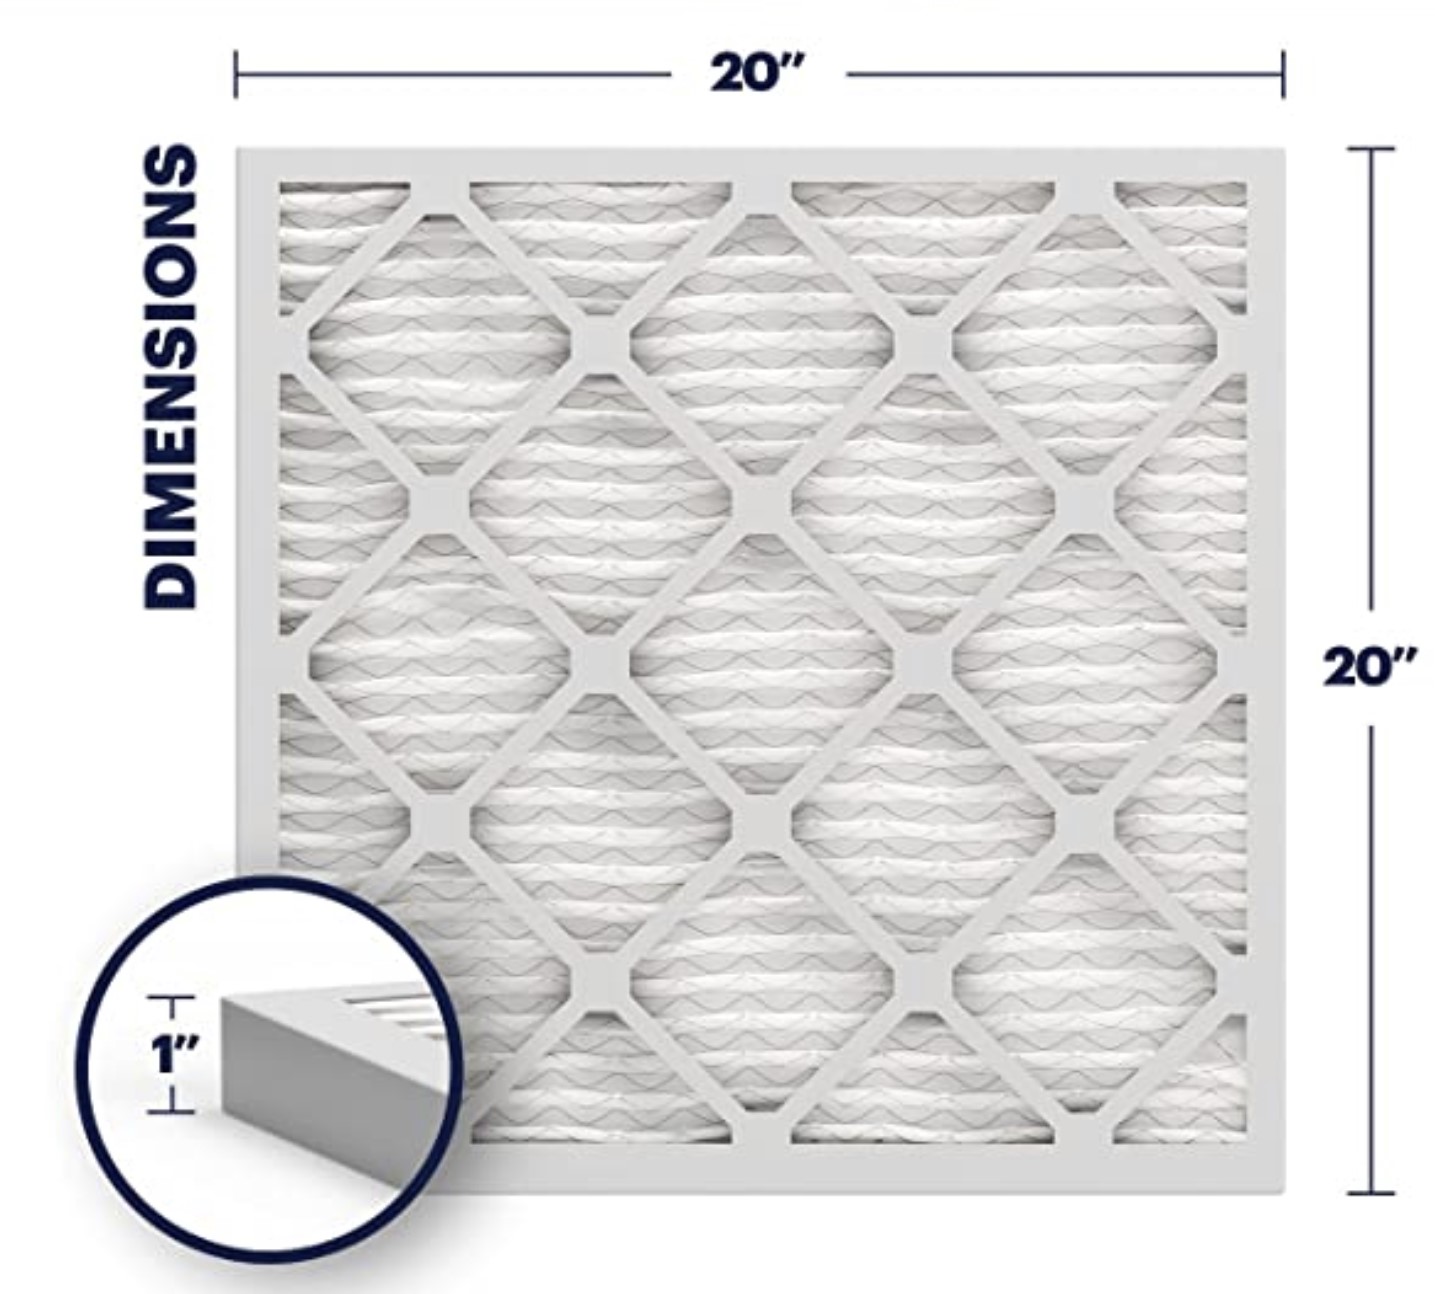 What Materials Are Used In Air Filters?